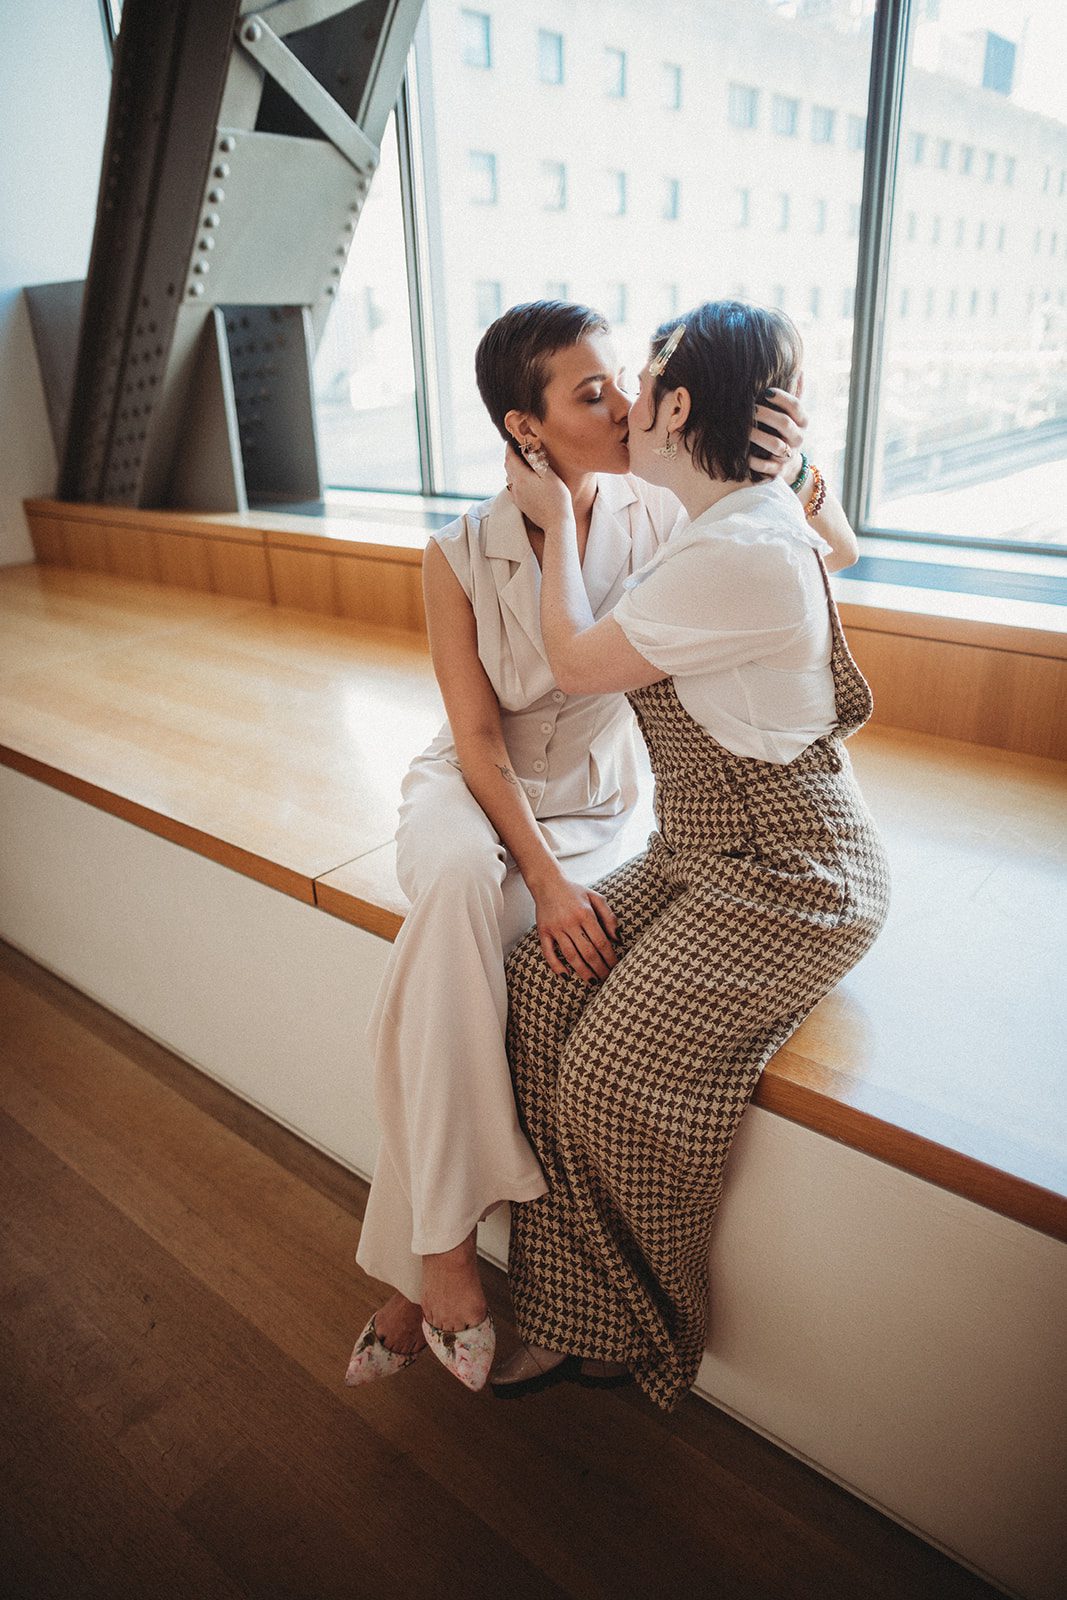 Sitting by the window, the Aves and Lex passionately kiss. They wear jumpsuits, Aves is cream colored and Lex wheres a cross stitched pattern with an overall top. Aves top is more formal, yet very elegant and modern. The both wear various jewelry and snappy shoes. 